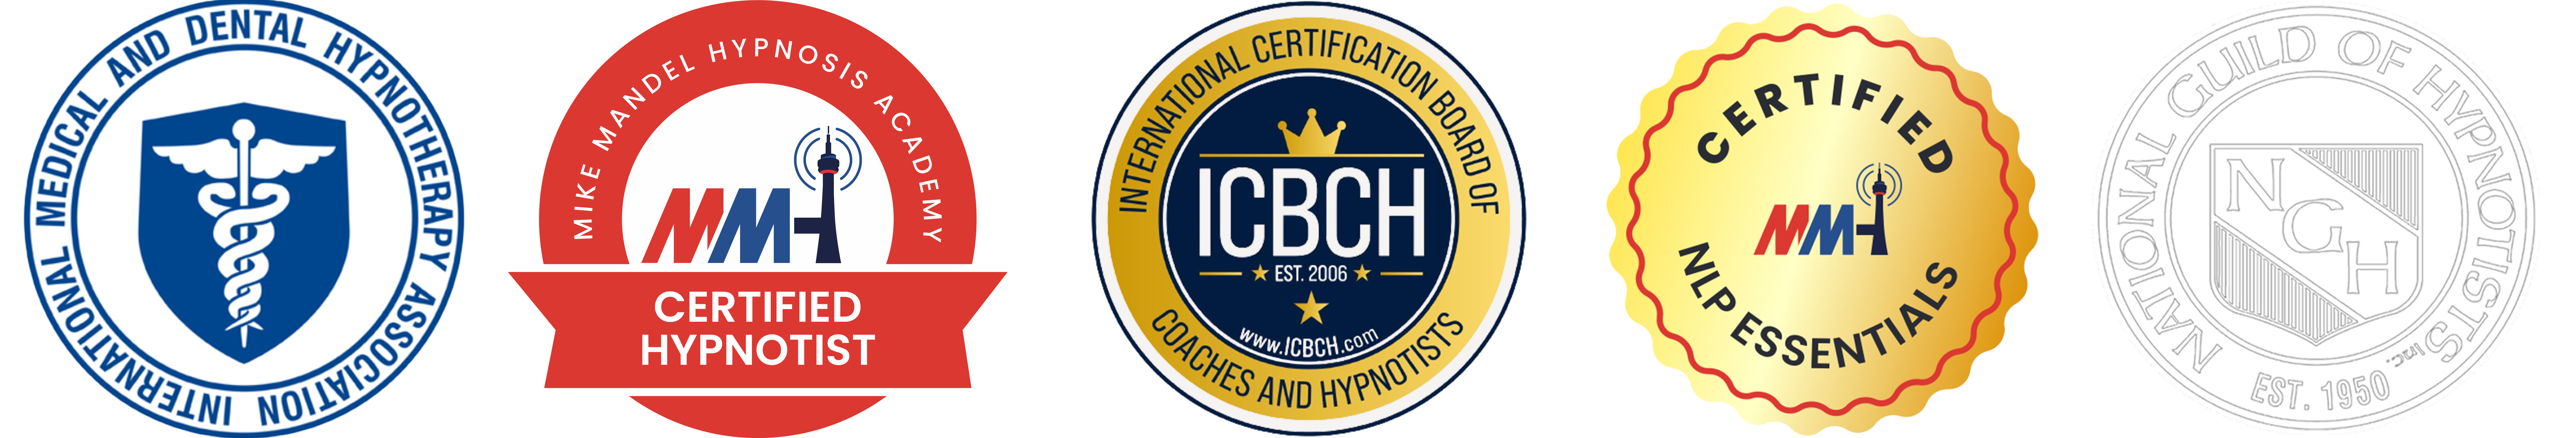 Certified Hypnotist from Mike Mandel Hypnosis Academy, International Certification Board Of Coaches and Hypnotists and National Guild Of Hypnotists